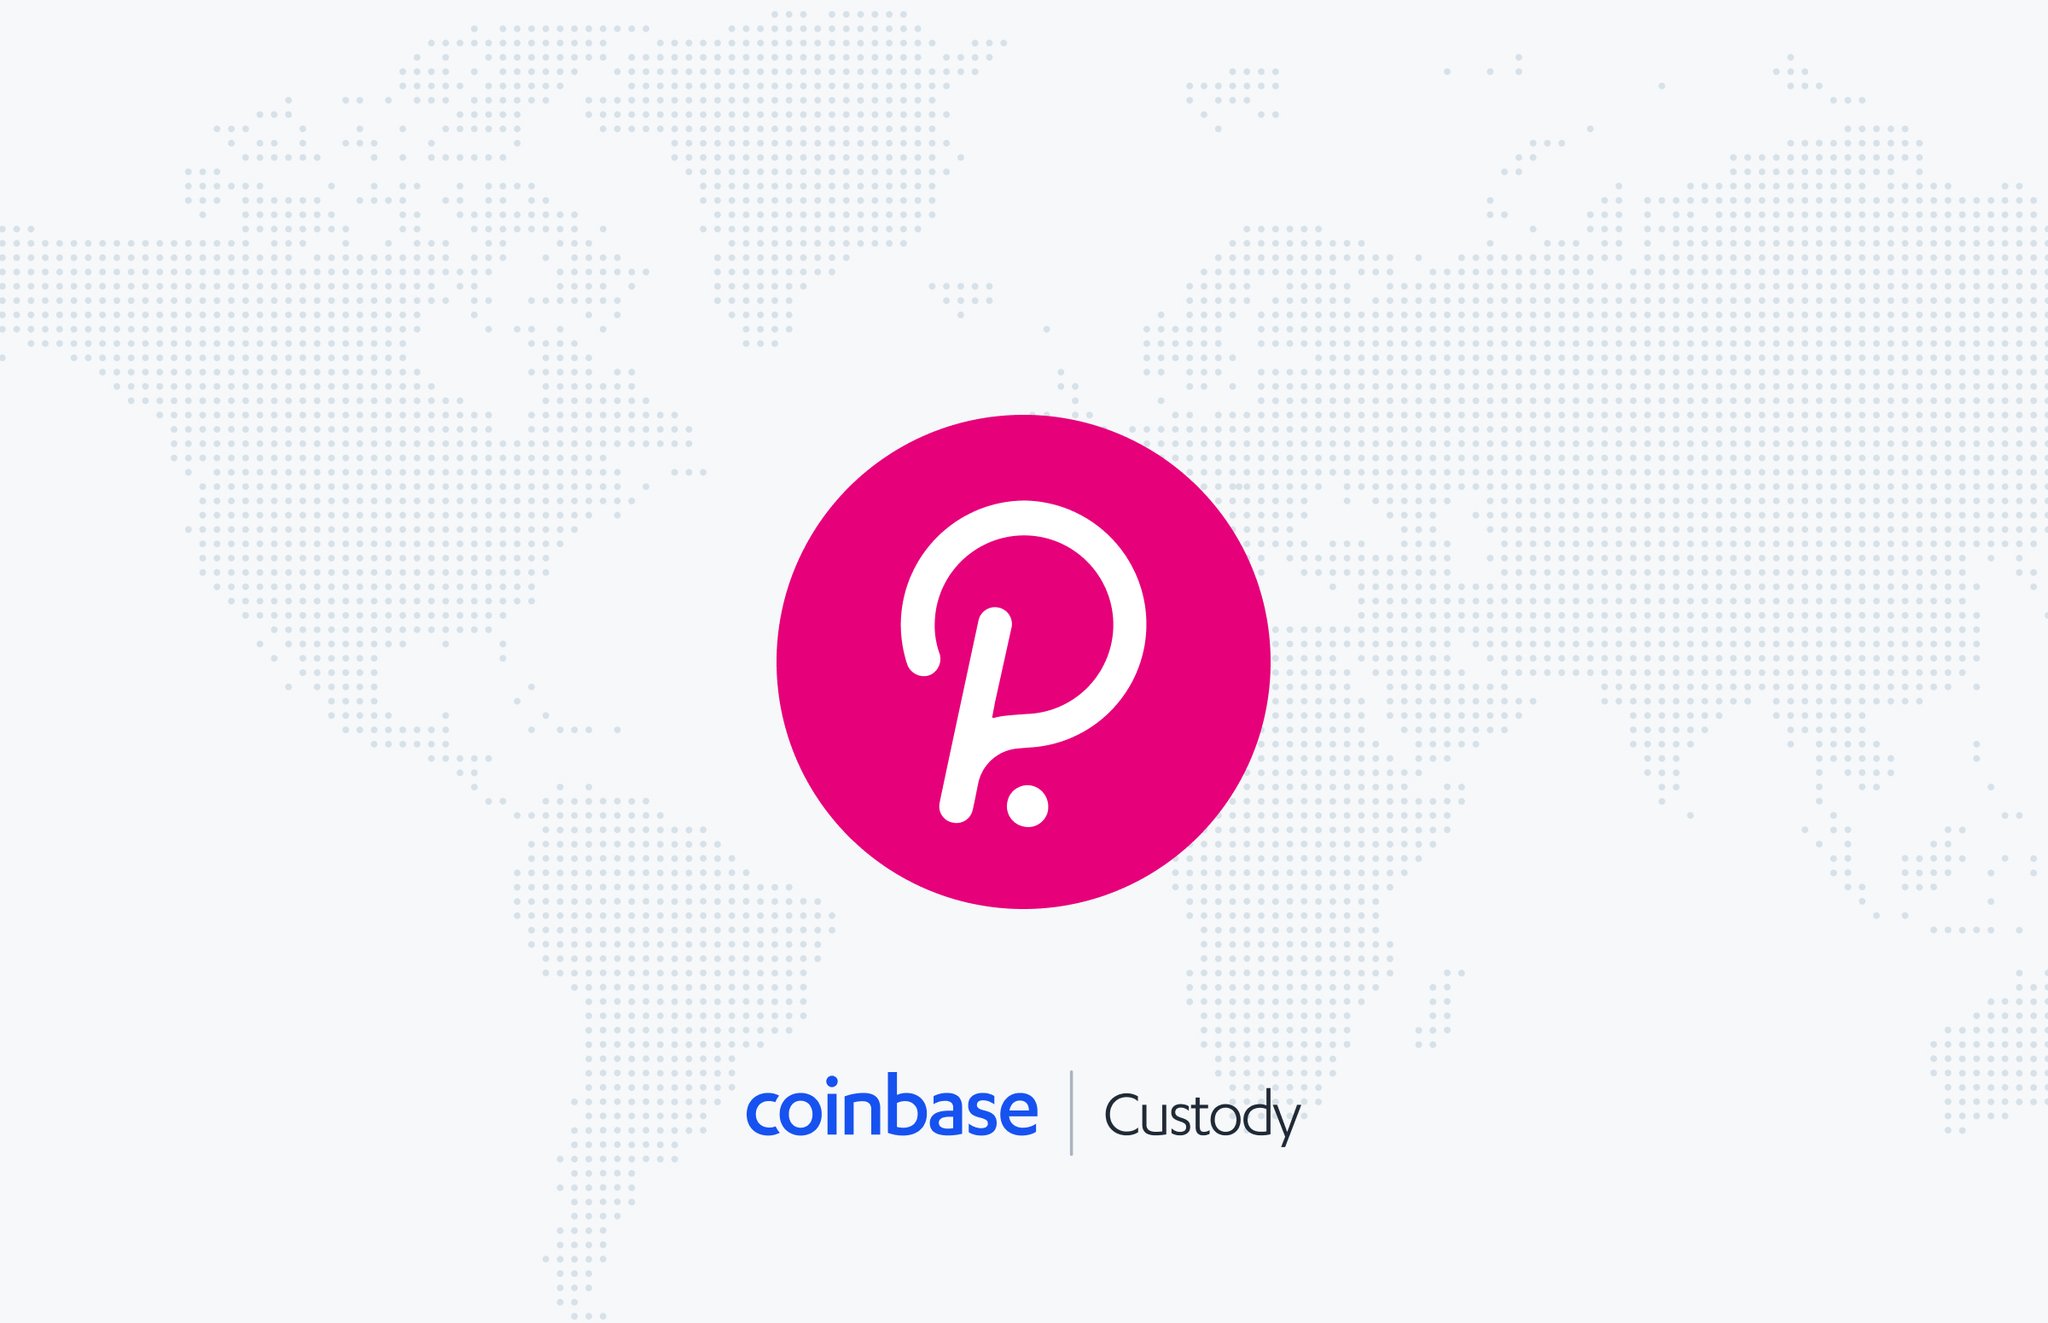 Coinbase Institutional on Twitter: "Coinbase Custody now ...